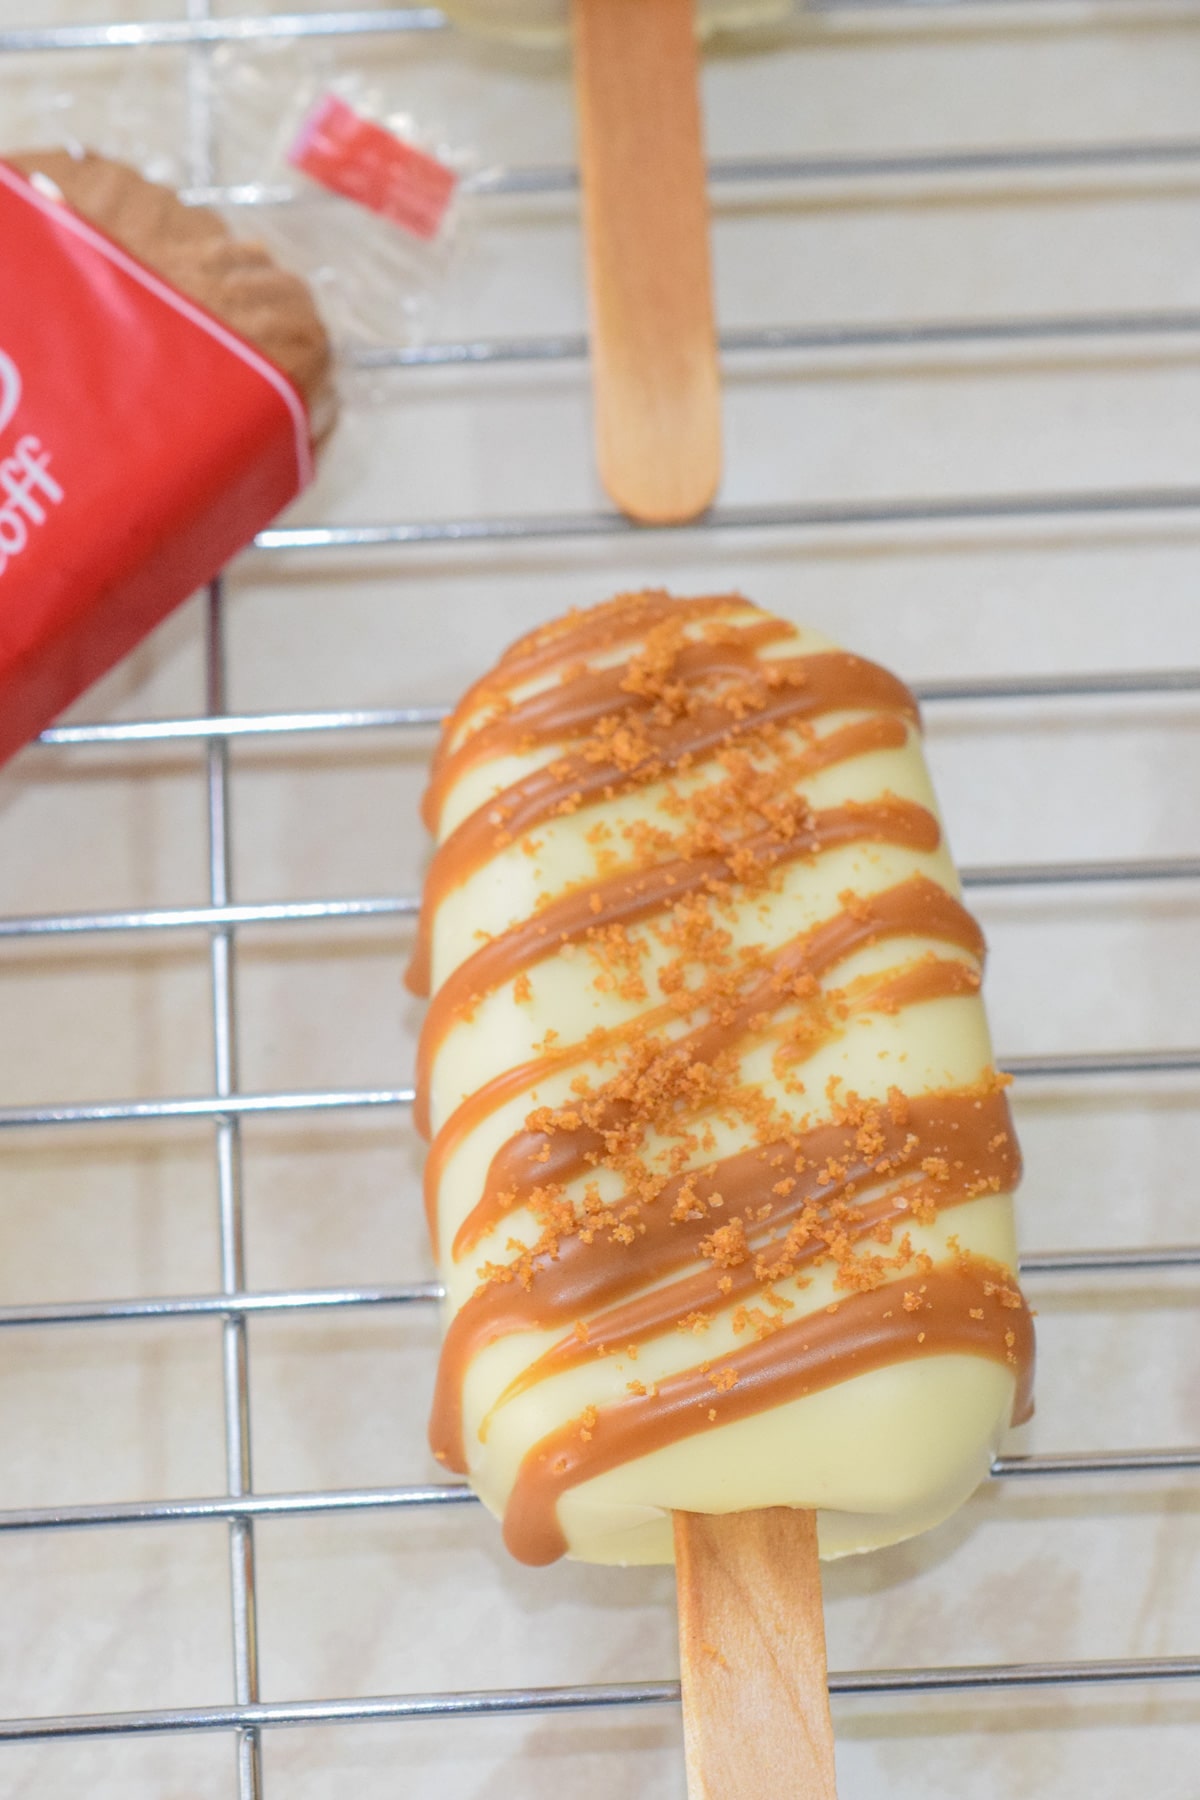 Lotus biscoff cakesicles (biscoff spread cake pop popsicles) close up